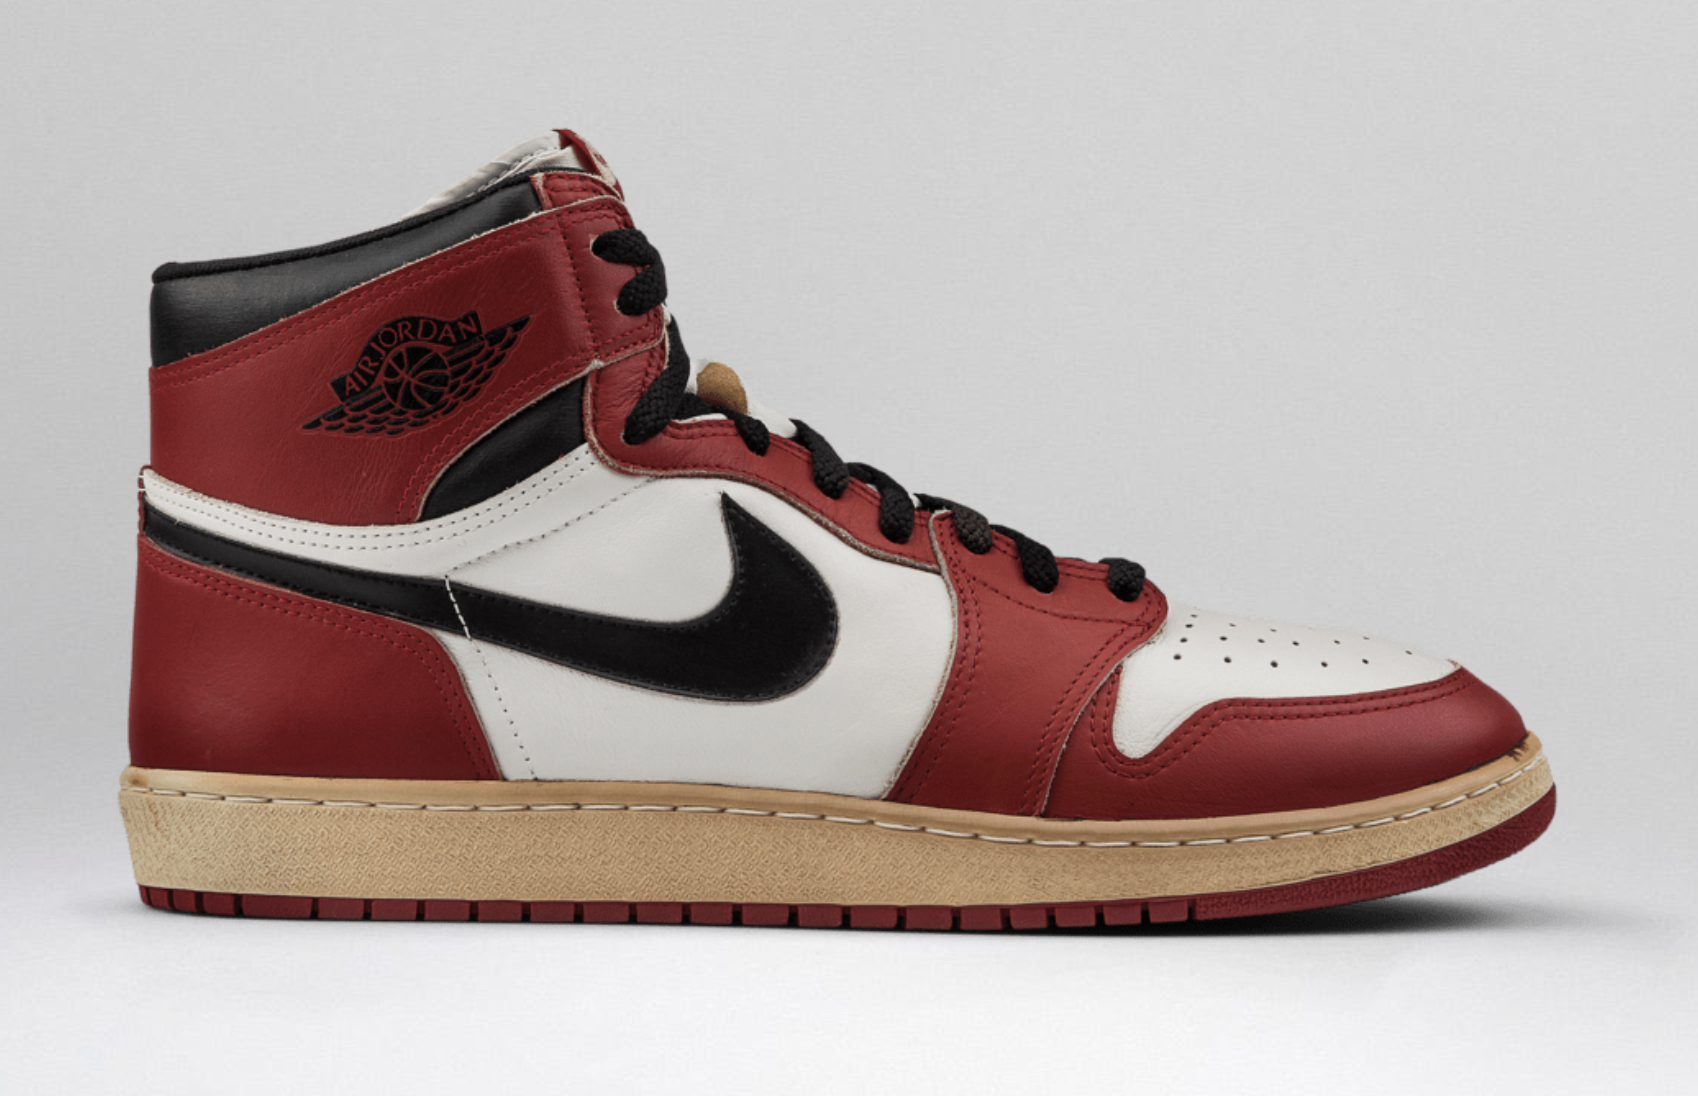 WpadcShops, Jordan Brand is continuing with another Chicago iteration of  the Air Jordan